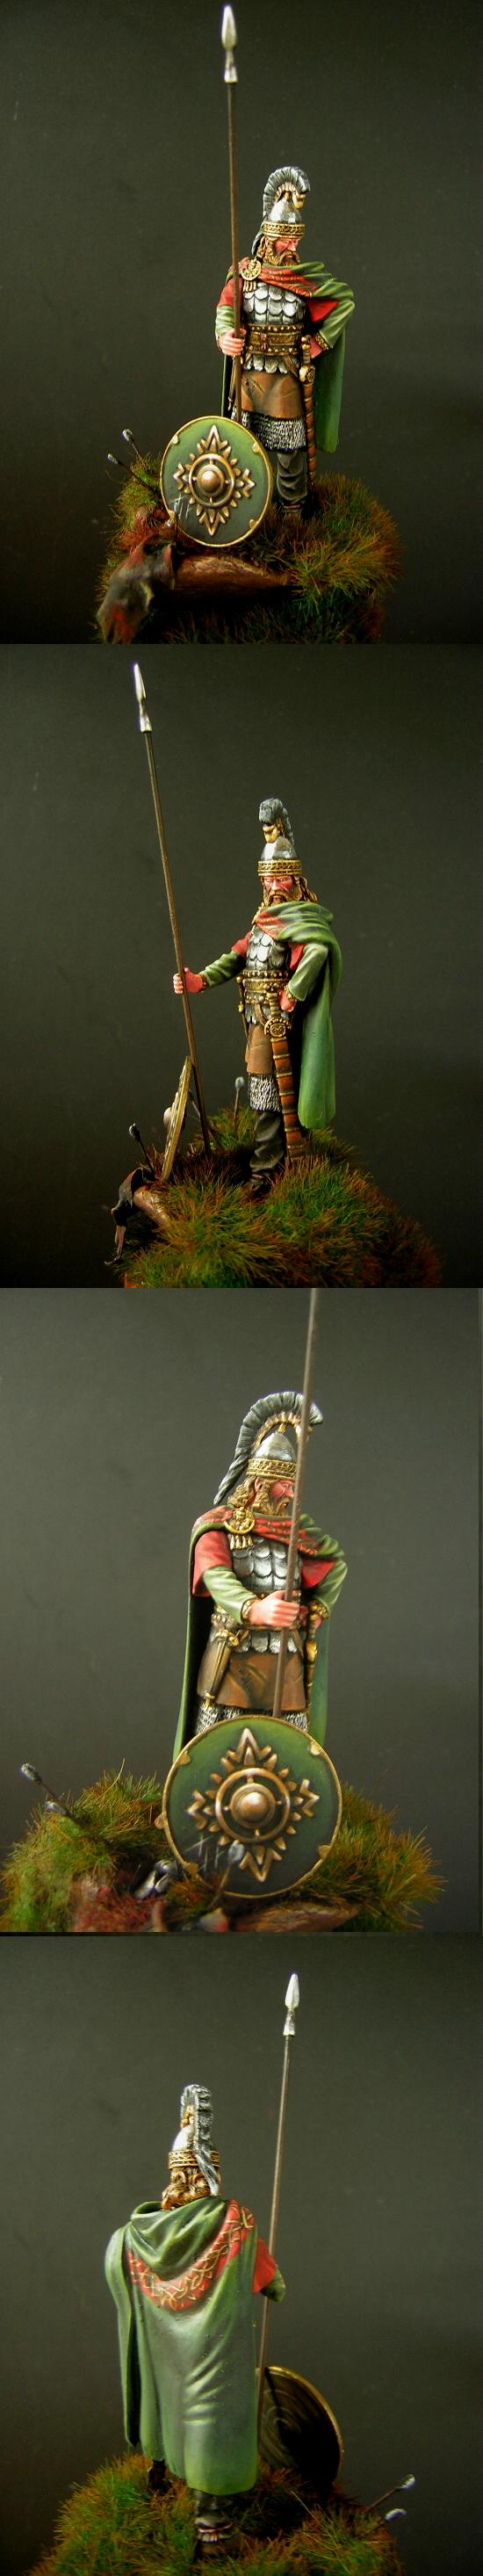 54mm, Lord Of The Rings, Rohan, Warhammer Fantasy